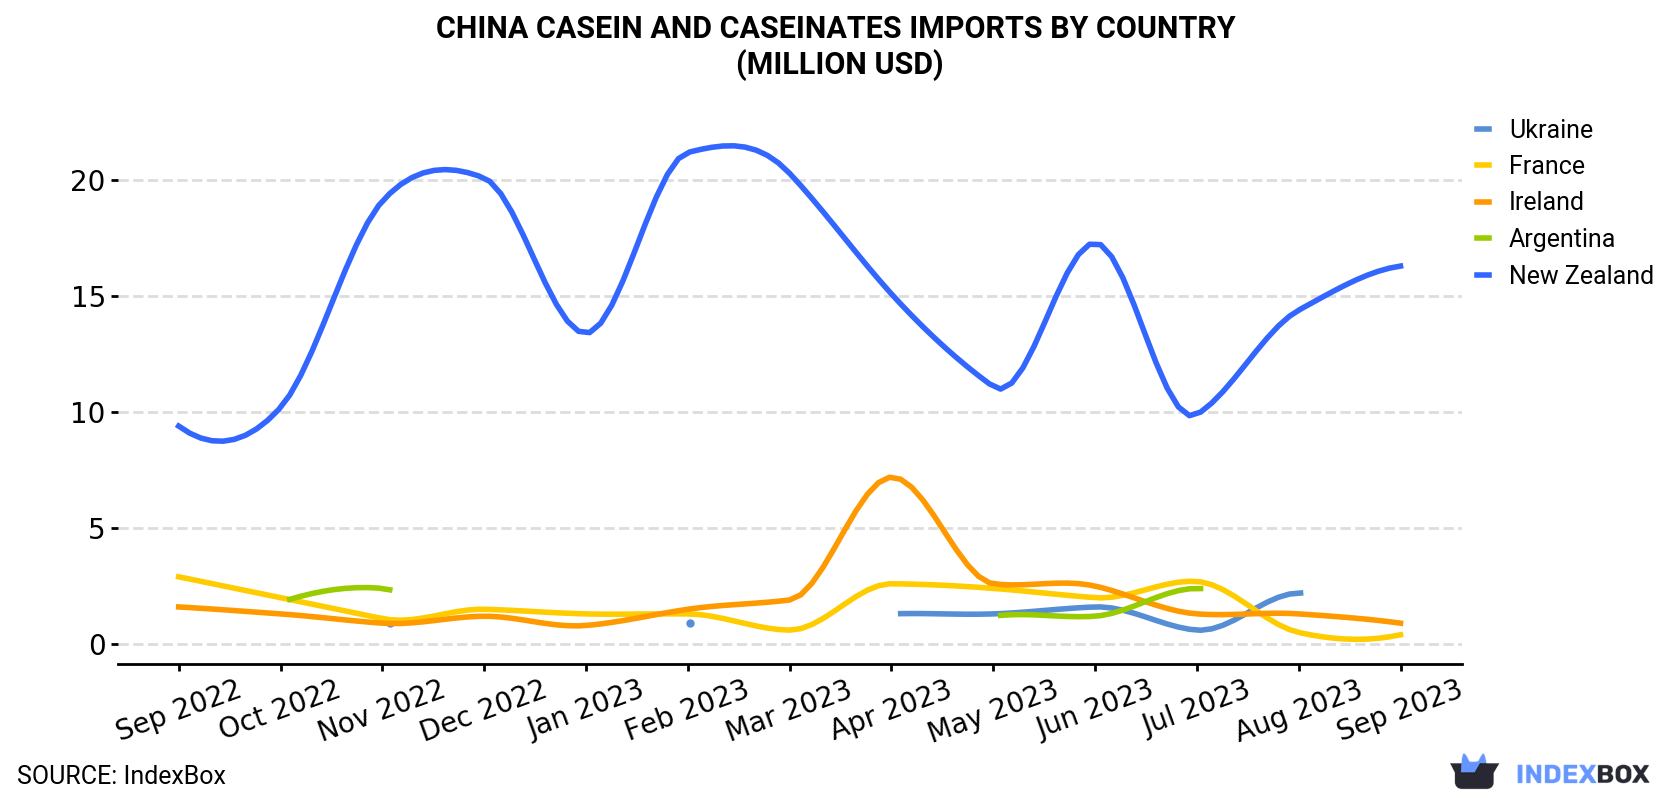 China Casein And Caseinates Imports By Country (Million USD)